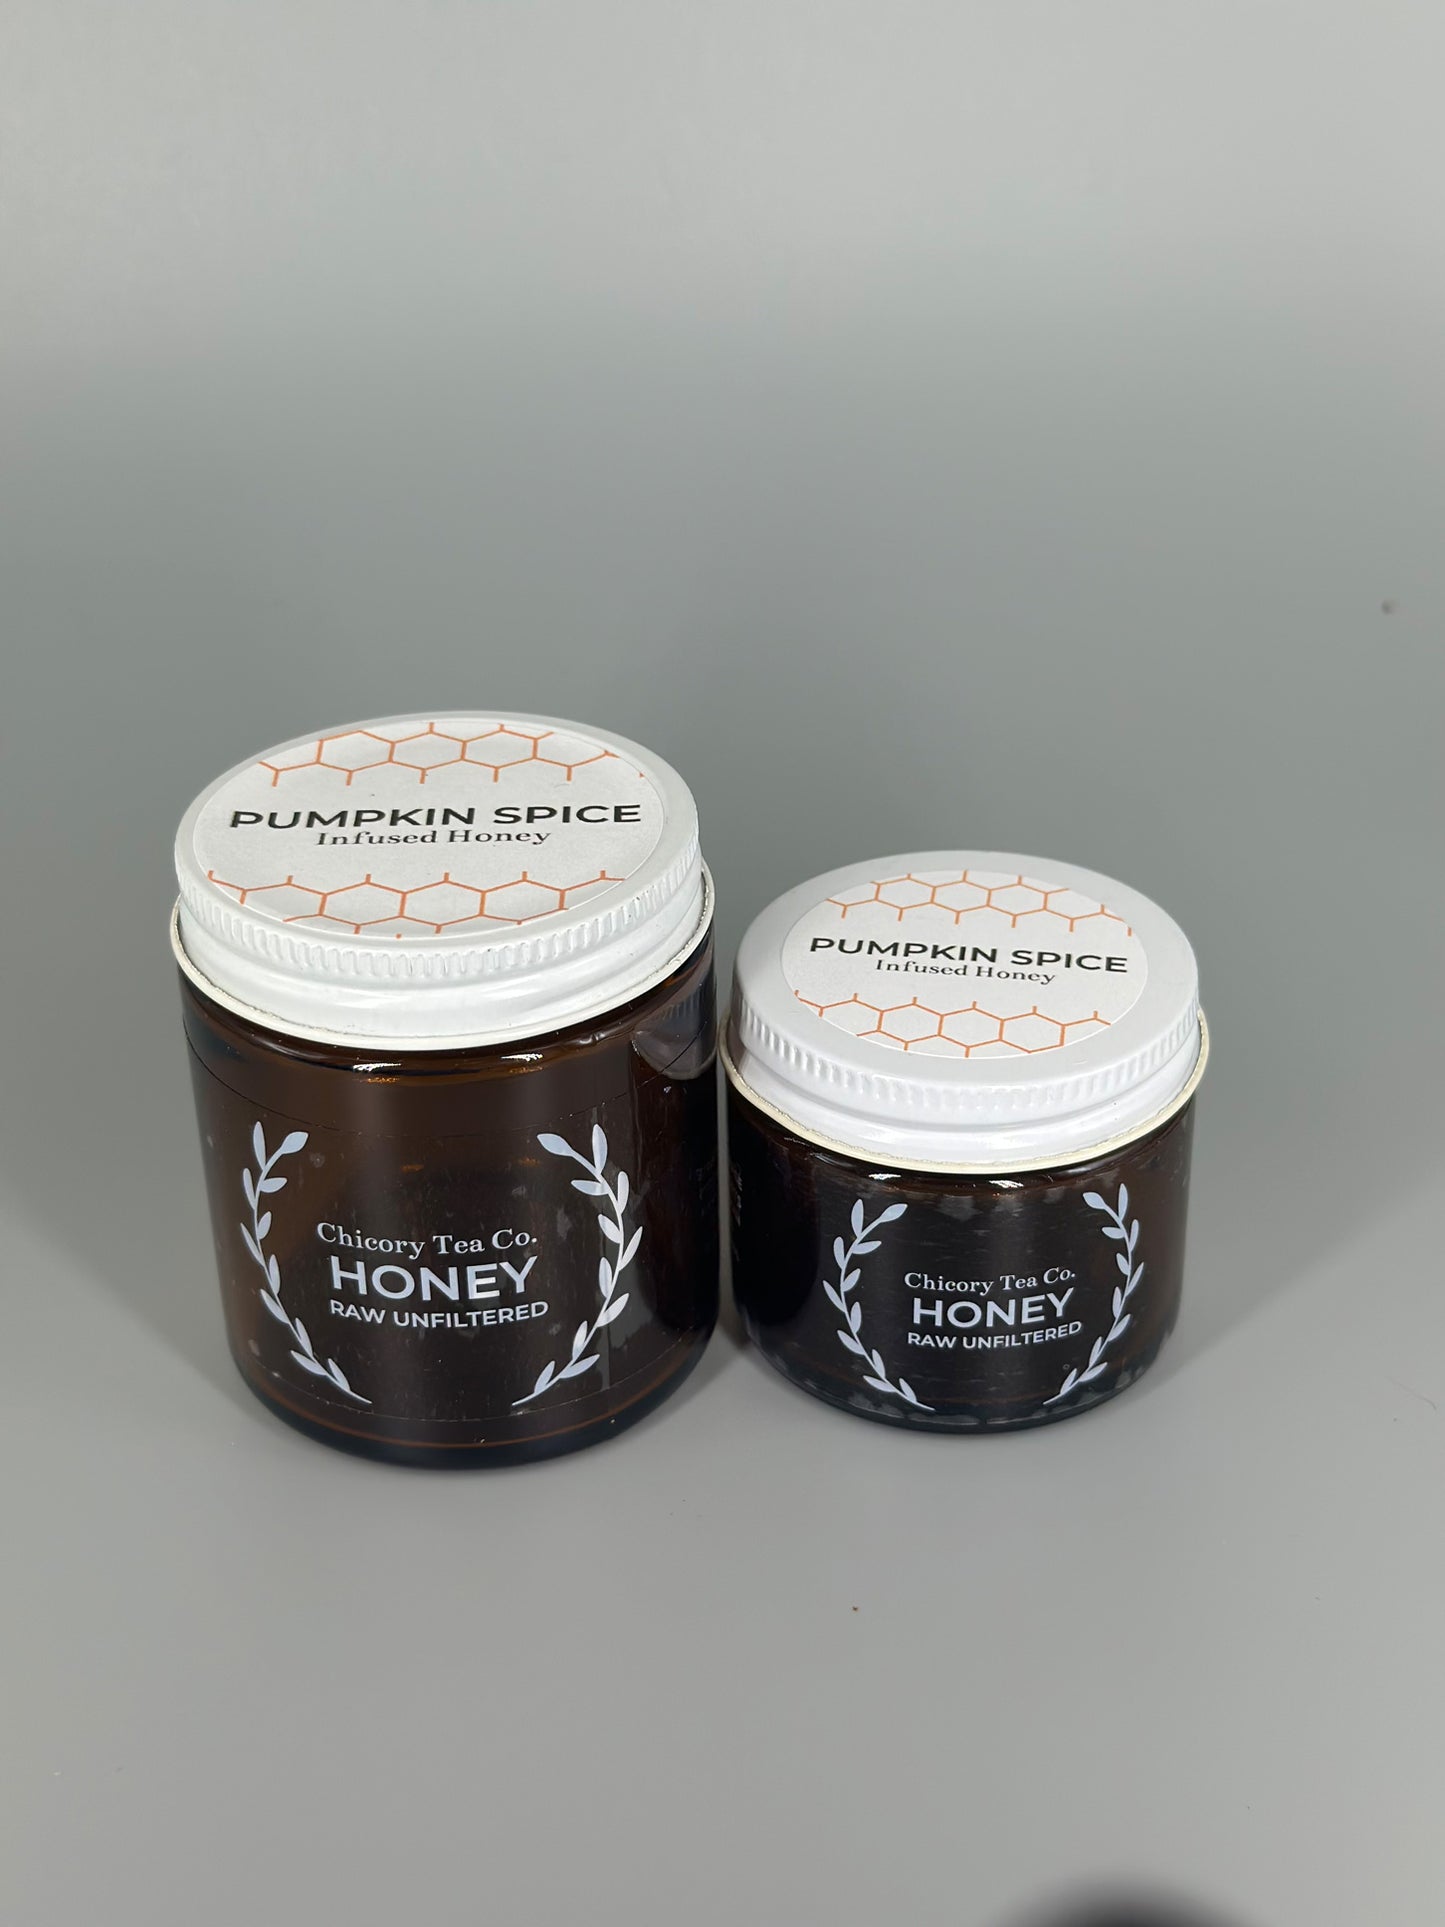 Chicory Tea Co.'s Pumpkin Spice Honey view both small and large from front